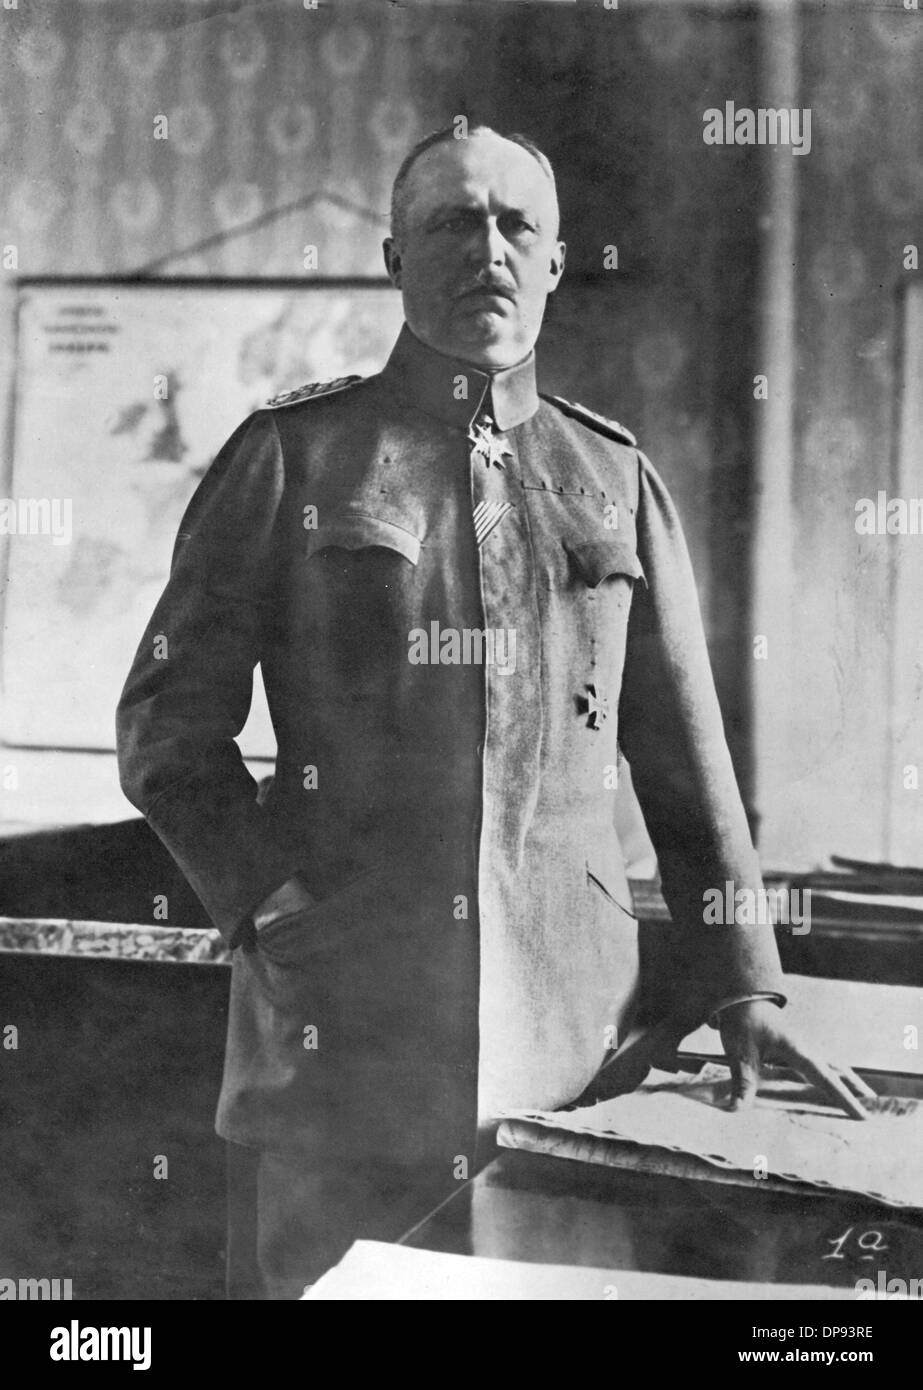 German General Erich Ludendorff in Prussian military uniform. Place and date unknown. Ludendorff (1865-1937) was Quartermaster General and part of the Third Supreme Command of the German Imperial Army in World War I. Fotoarchiv für Zeitgeschichte Stock Photo